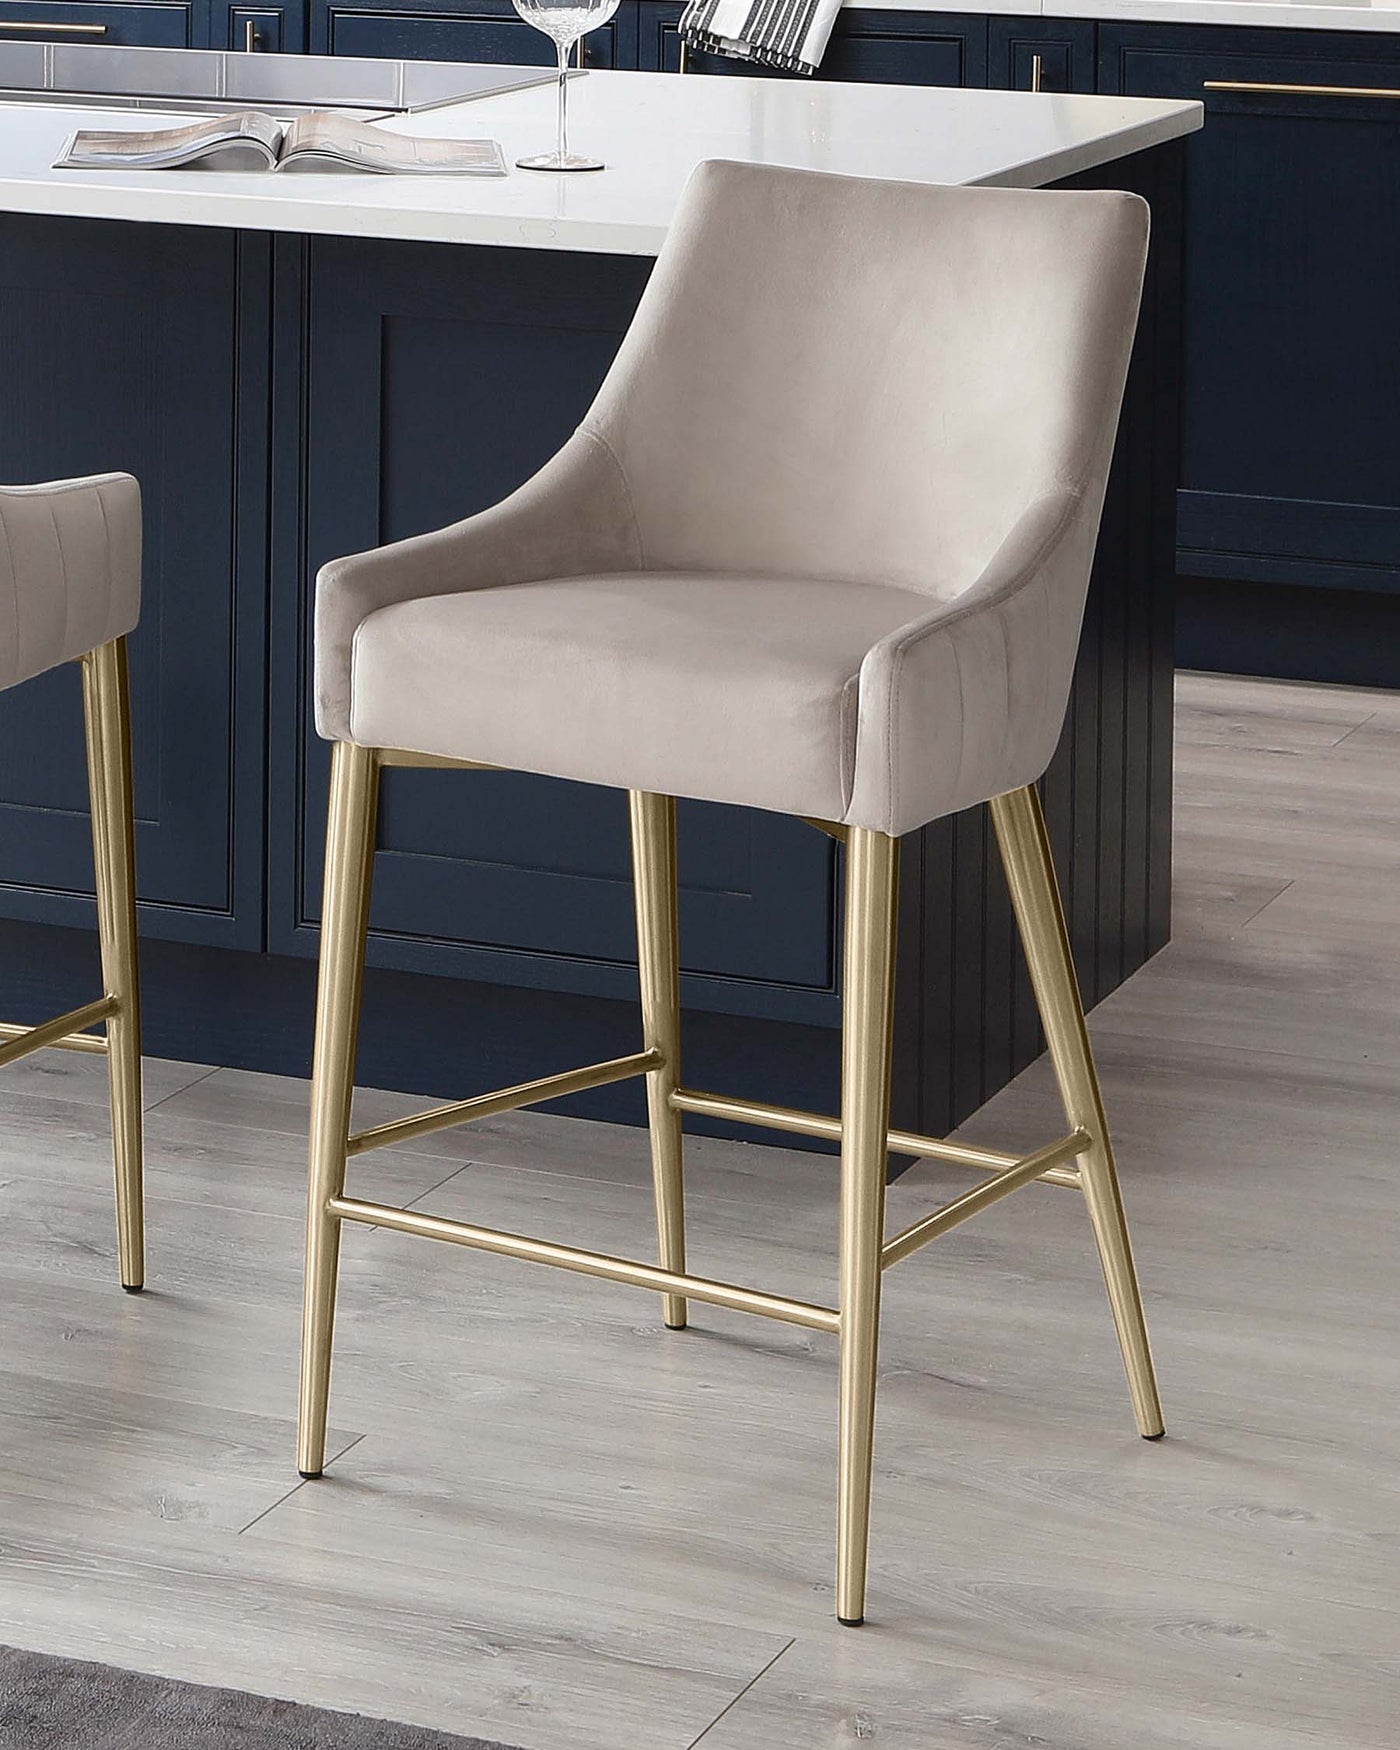 Elegant modern bar stool with a beige velvet upholstered seat and backrest, featuring sleek armrests, and supported by a sturdy gold-finished metal frame with footrests.